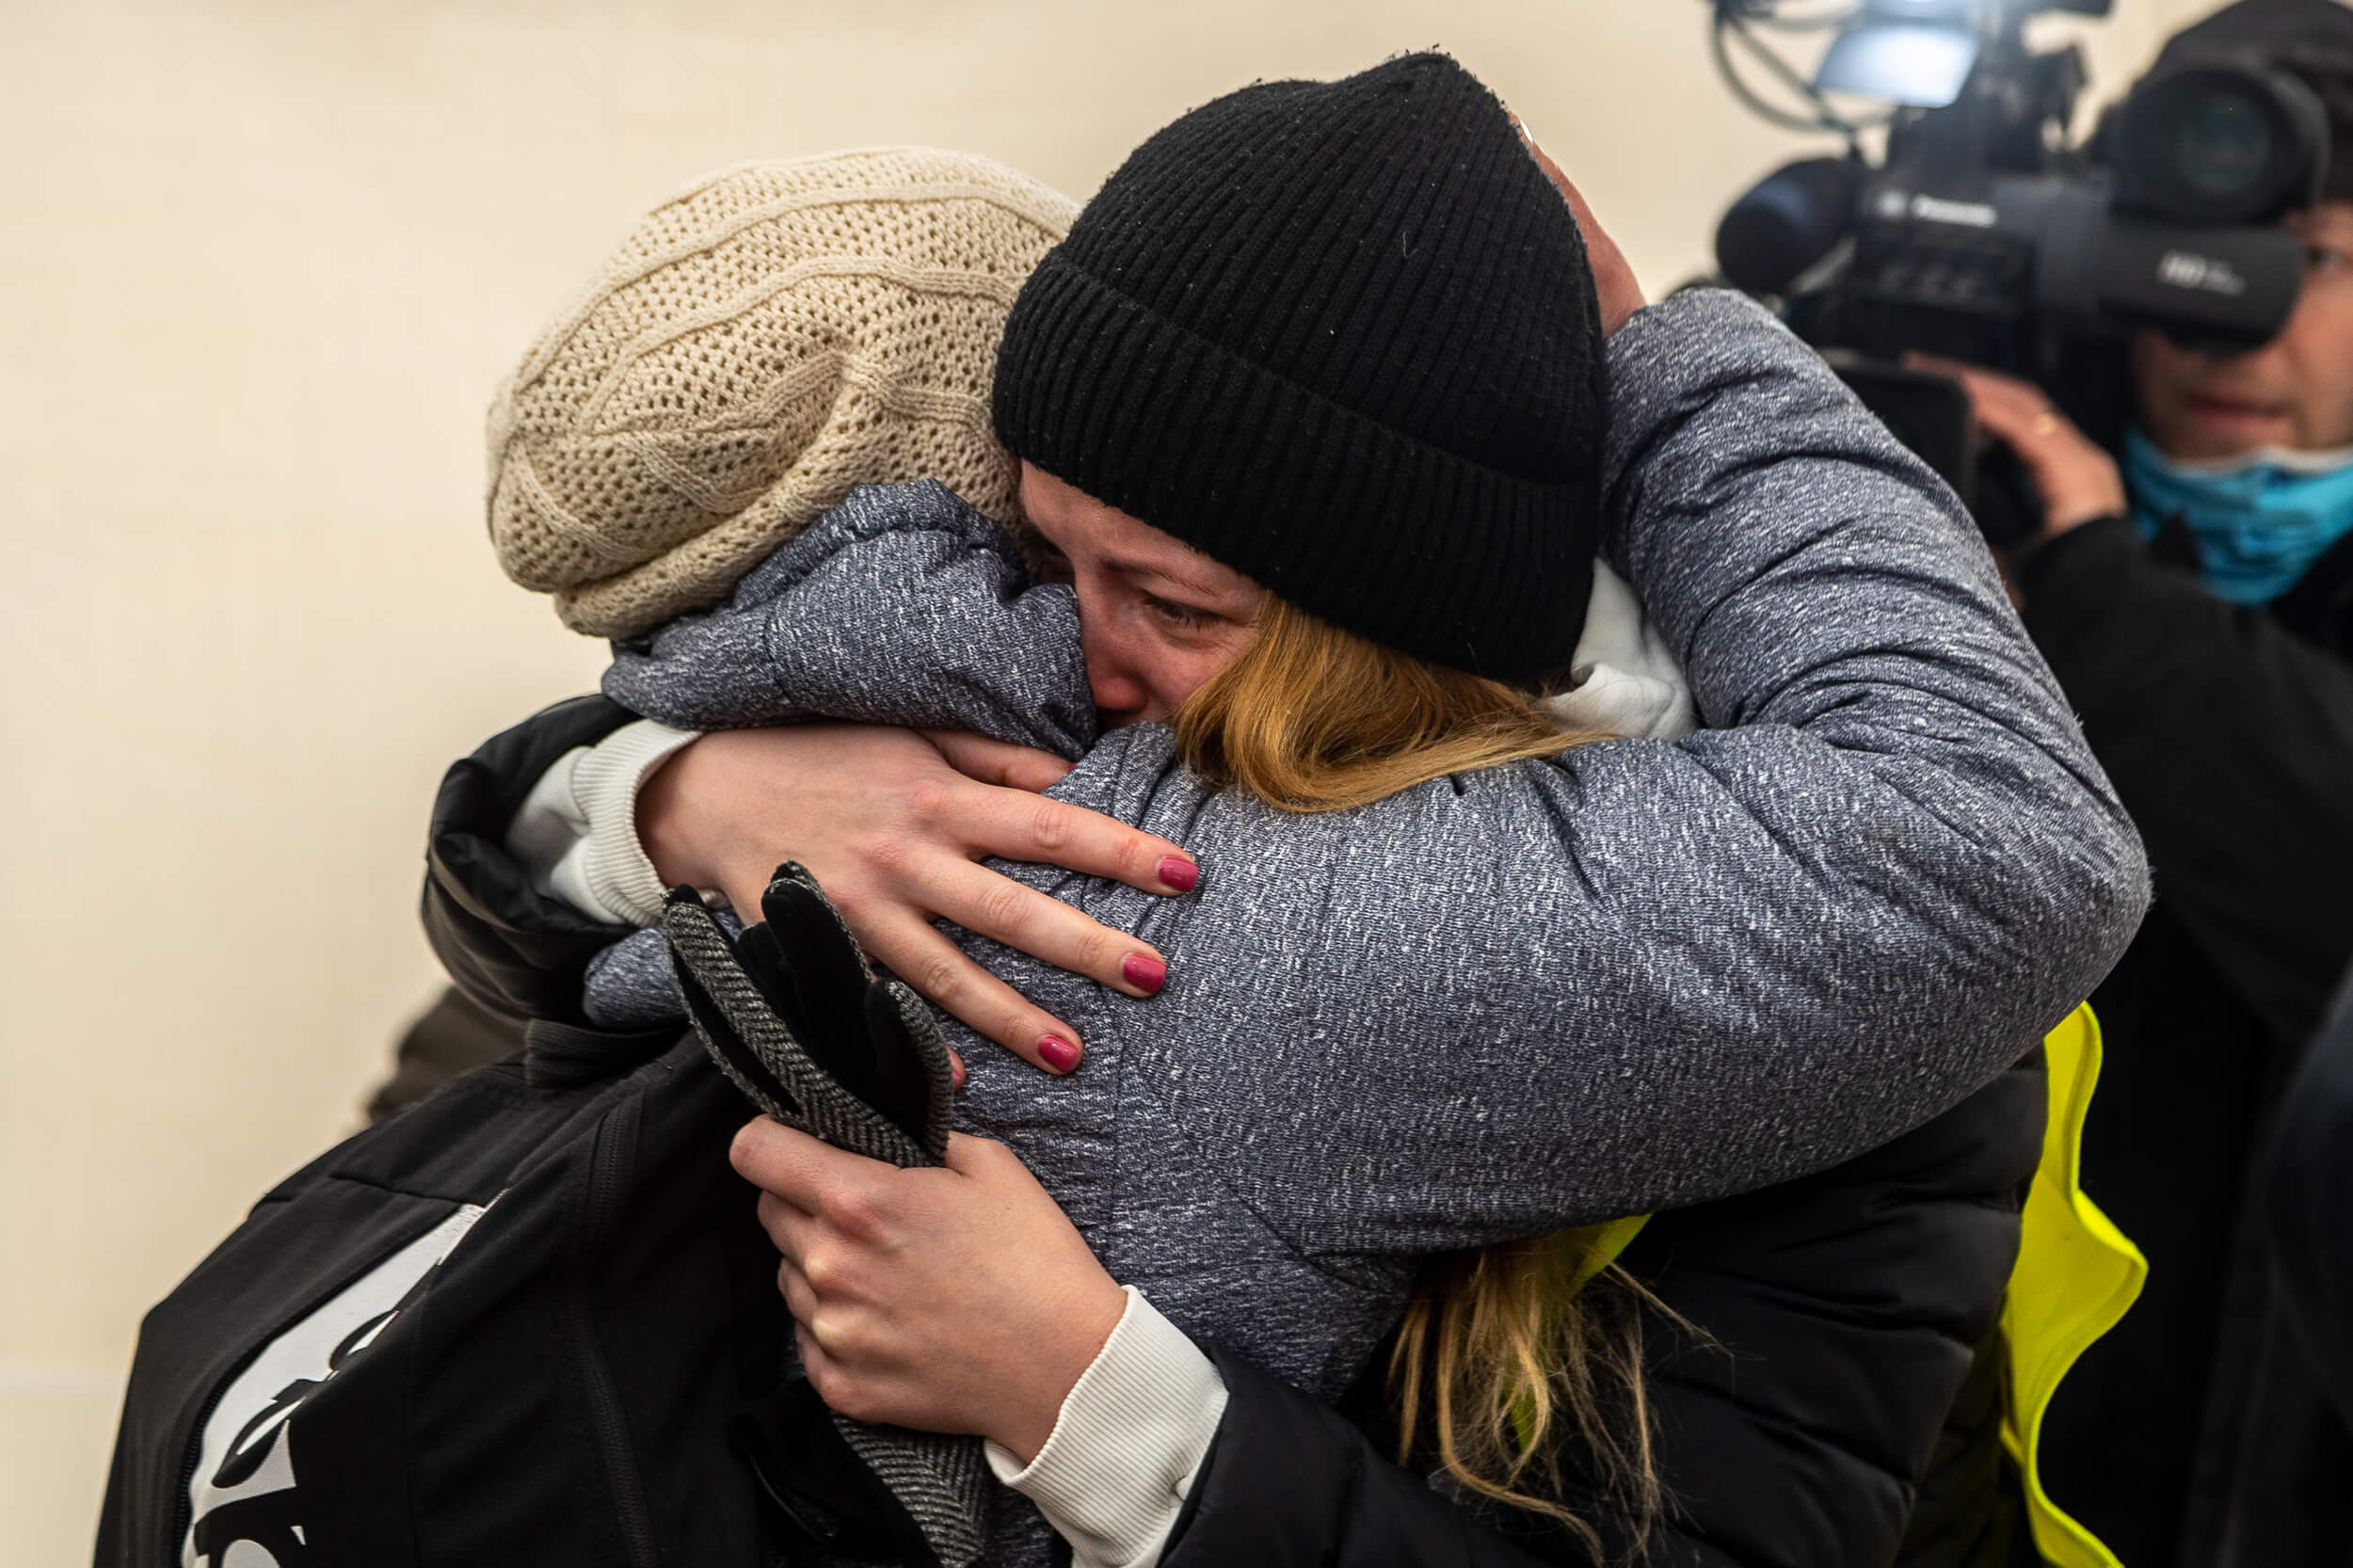 A volunteer emotionally embraces an acquaintance who has just arrived from Ukraine with a fervor that can be gained only through shared trauma.